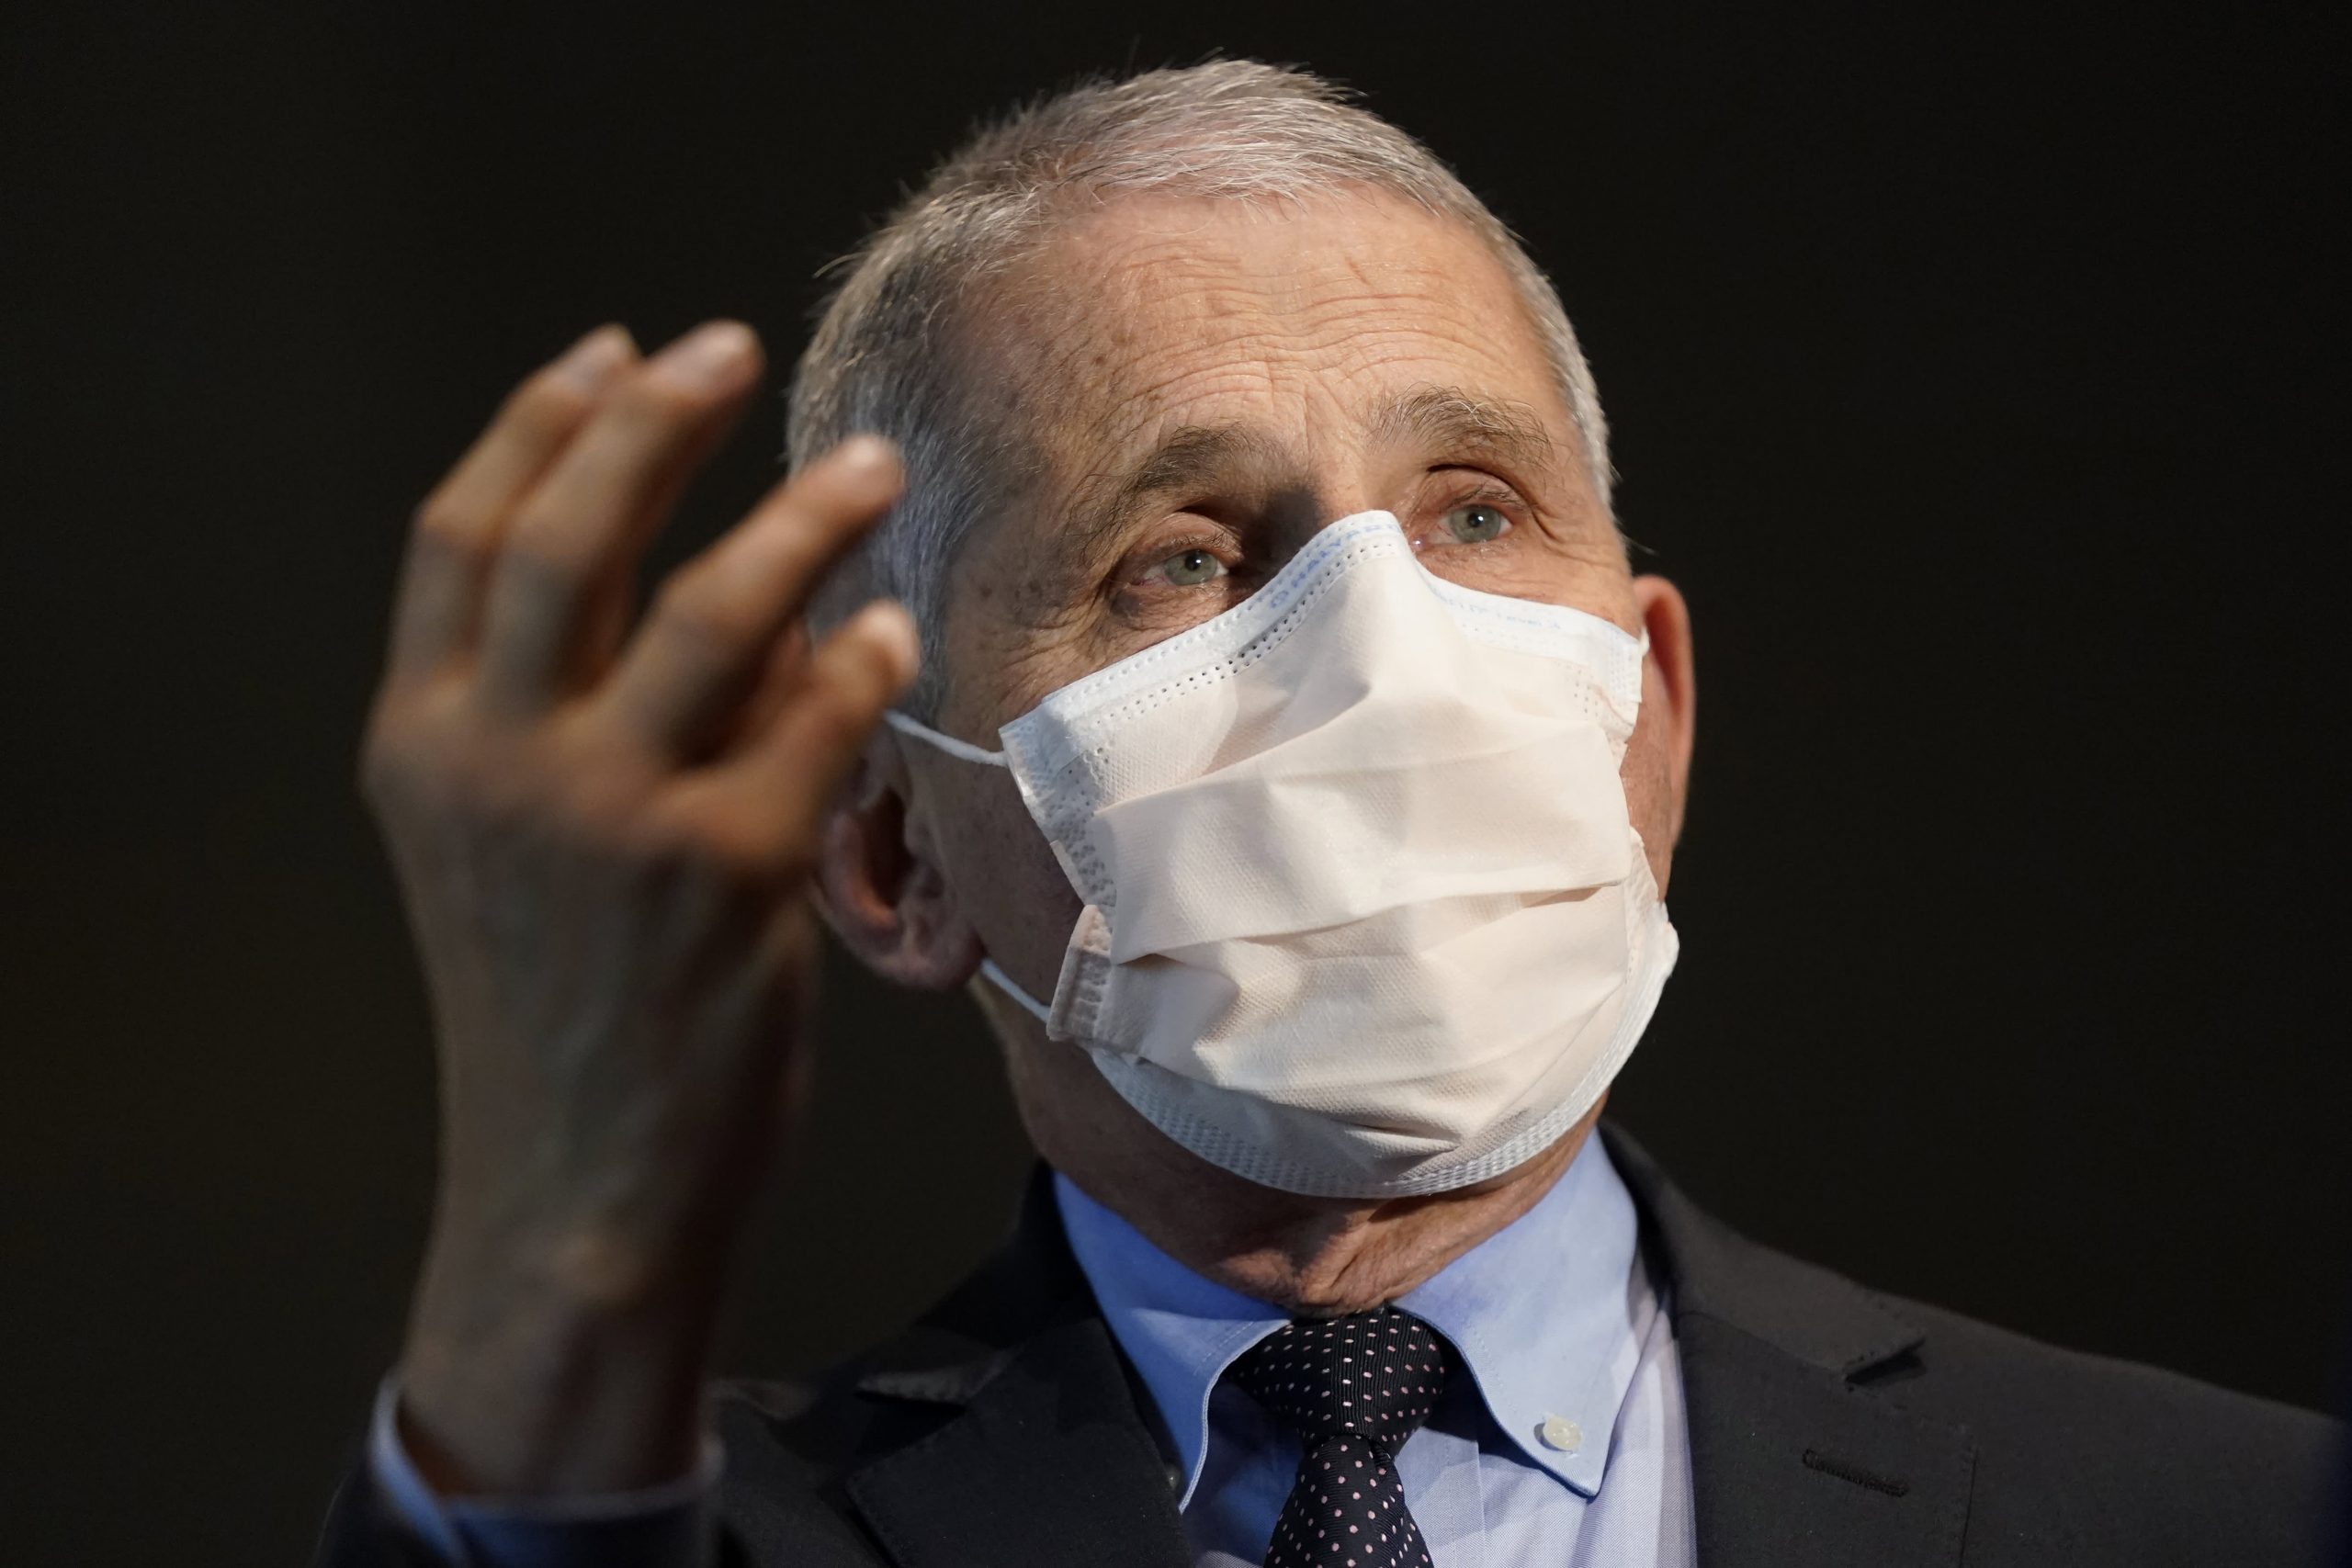 Dr. Fauci says slow Covid vaccine rollout has been 'disappointing'